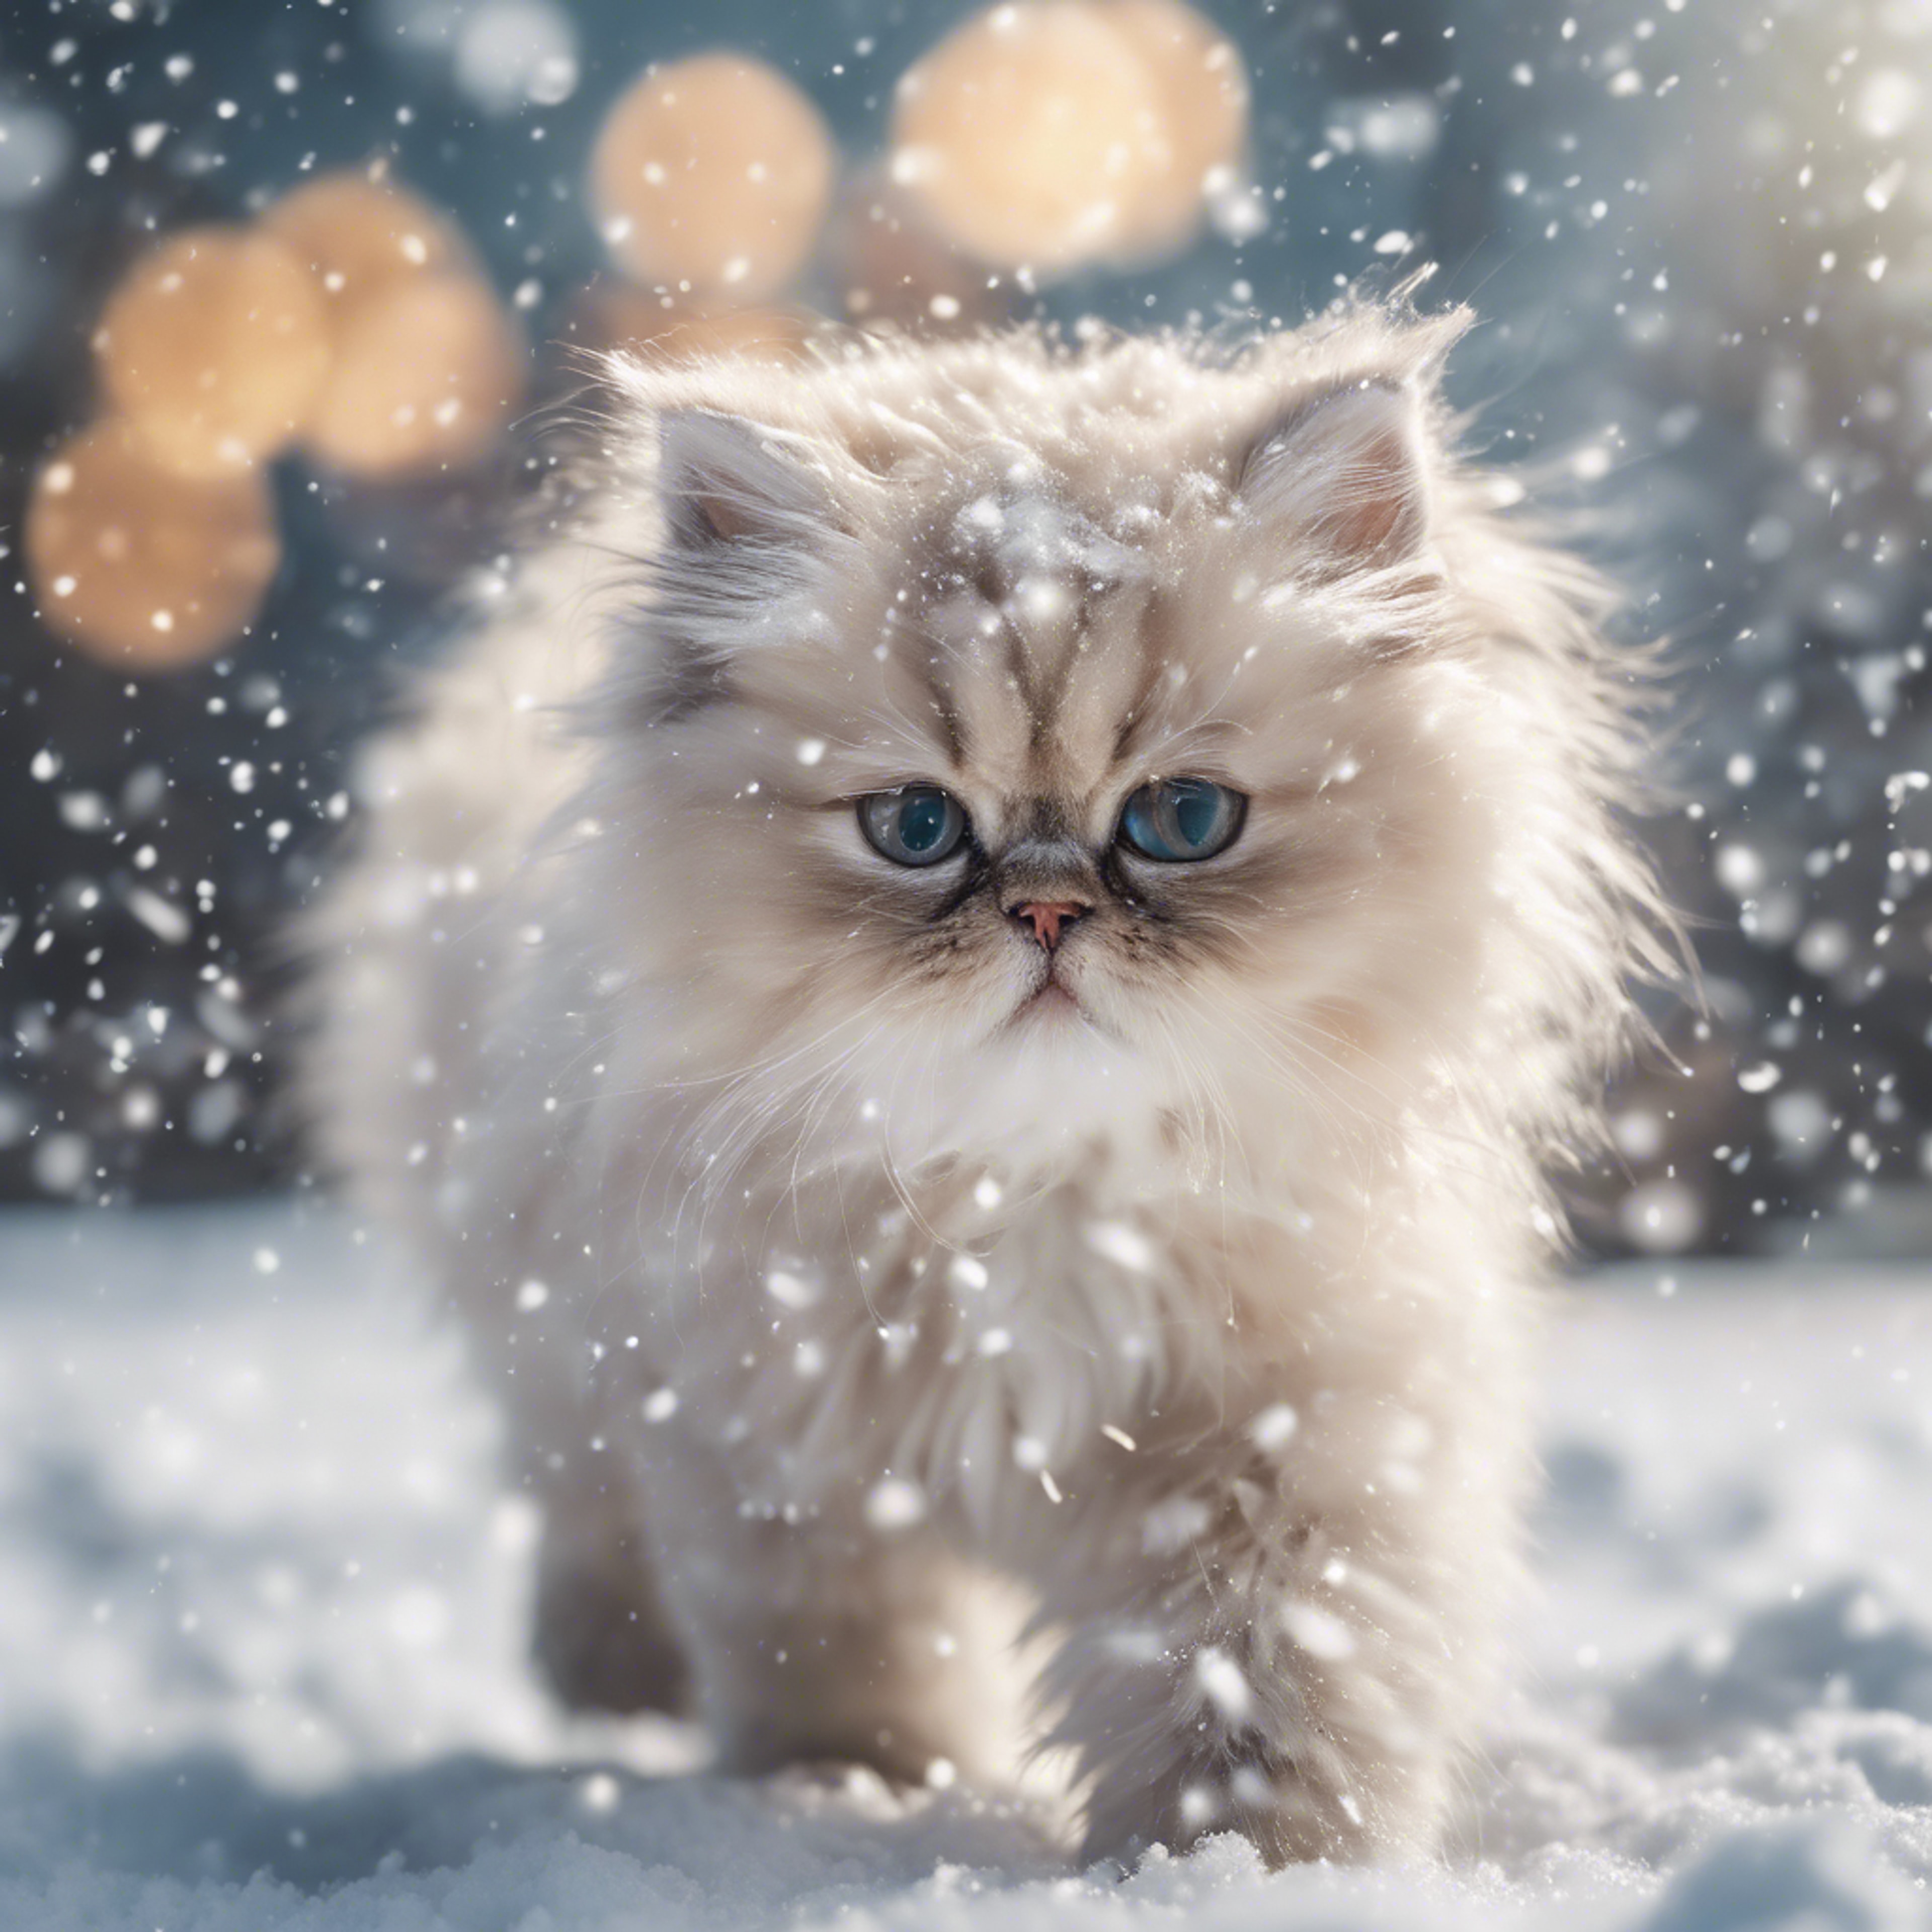 An animated winter scene of a fluffy Persian kitten chasing moving snowflakes.壁紙[a0dfe329de6f4e258514]